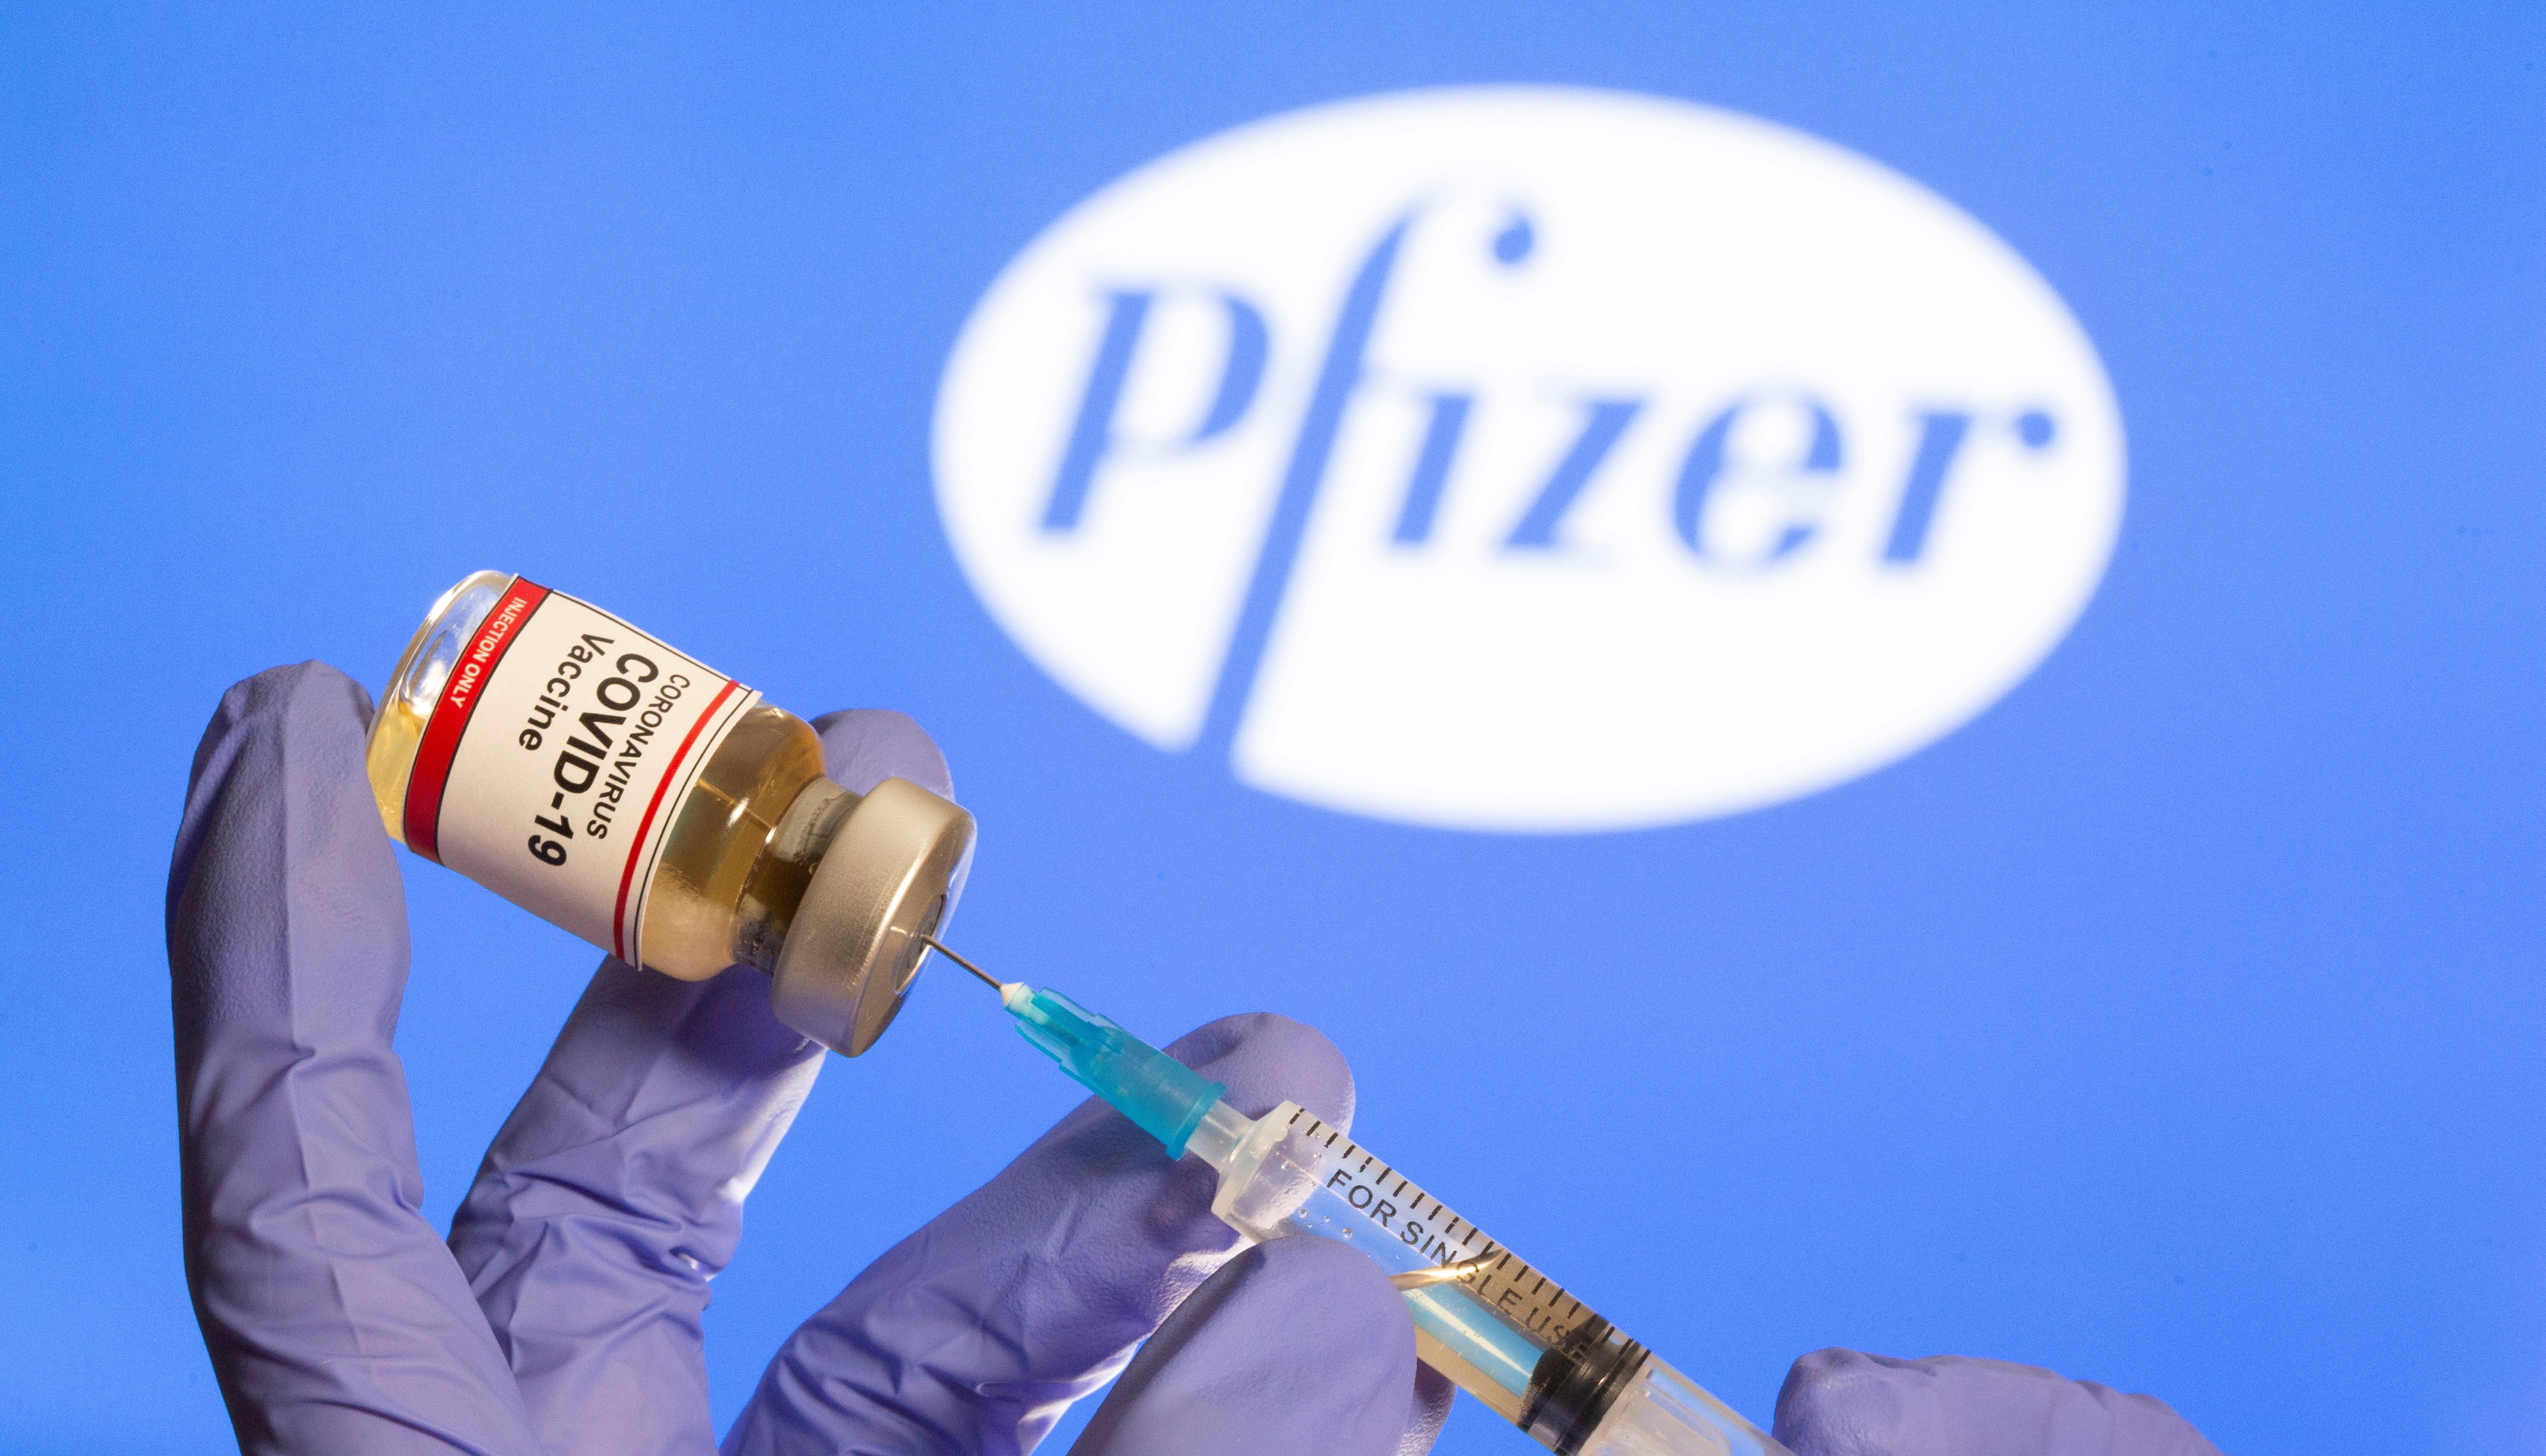 Pfizer is one of the two companies that sparked a market surge with their vaccine trial results